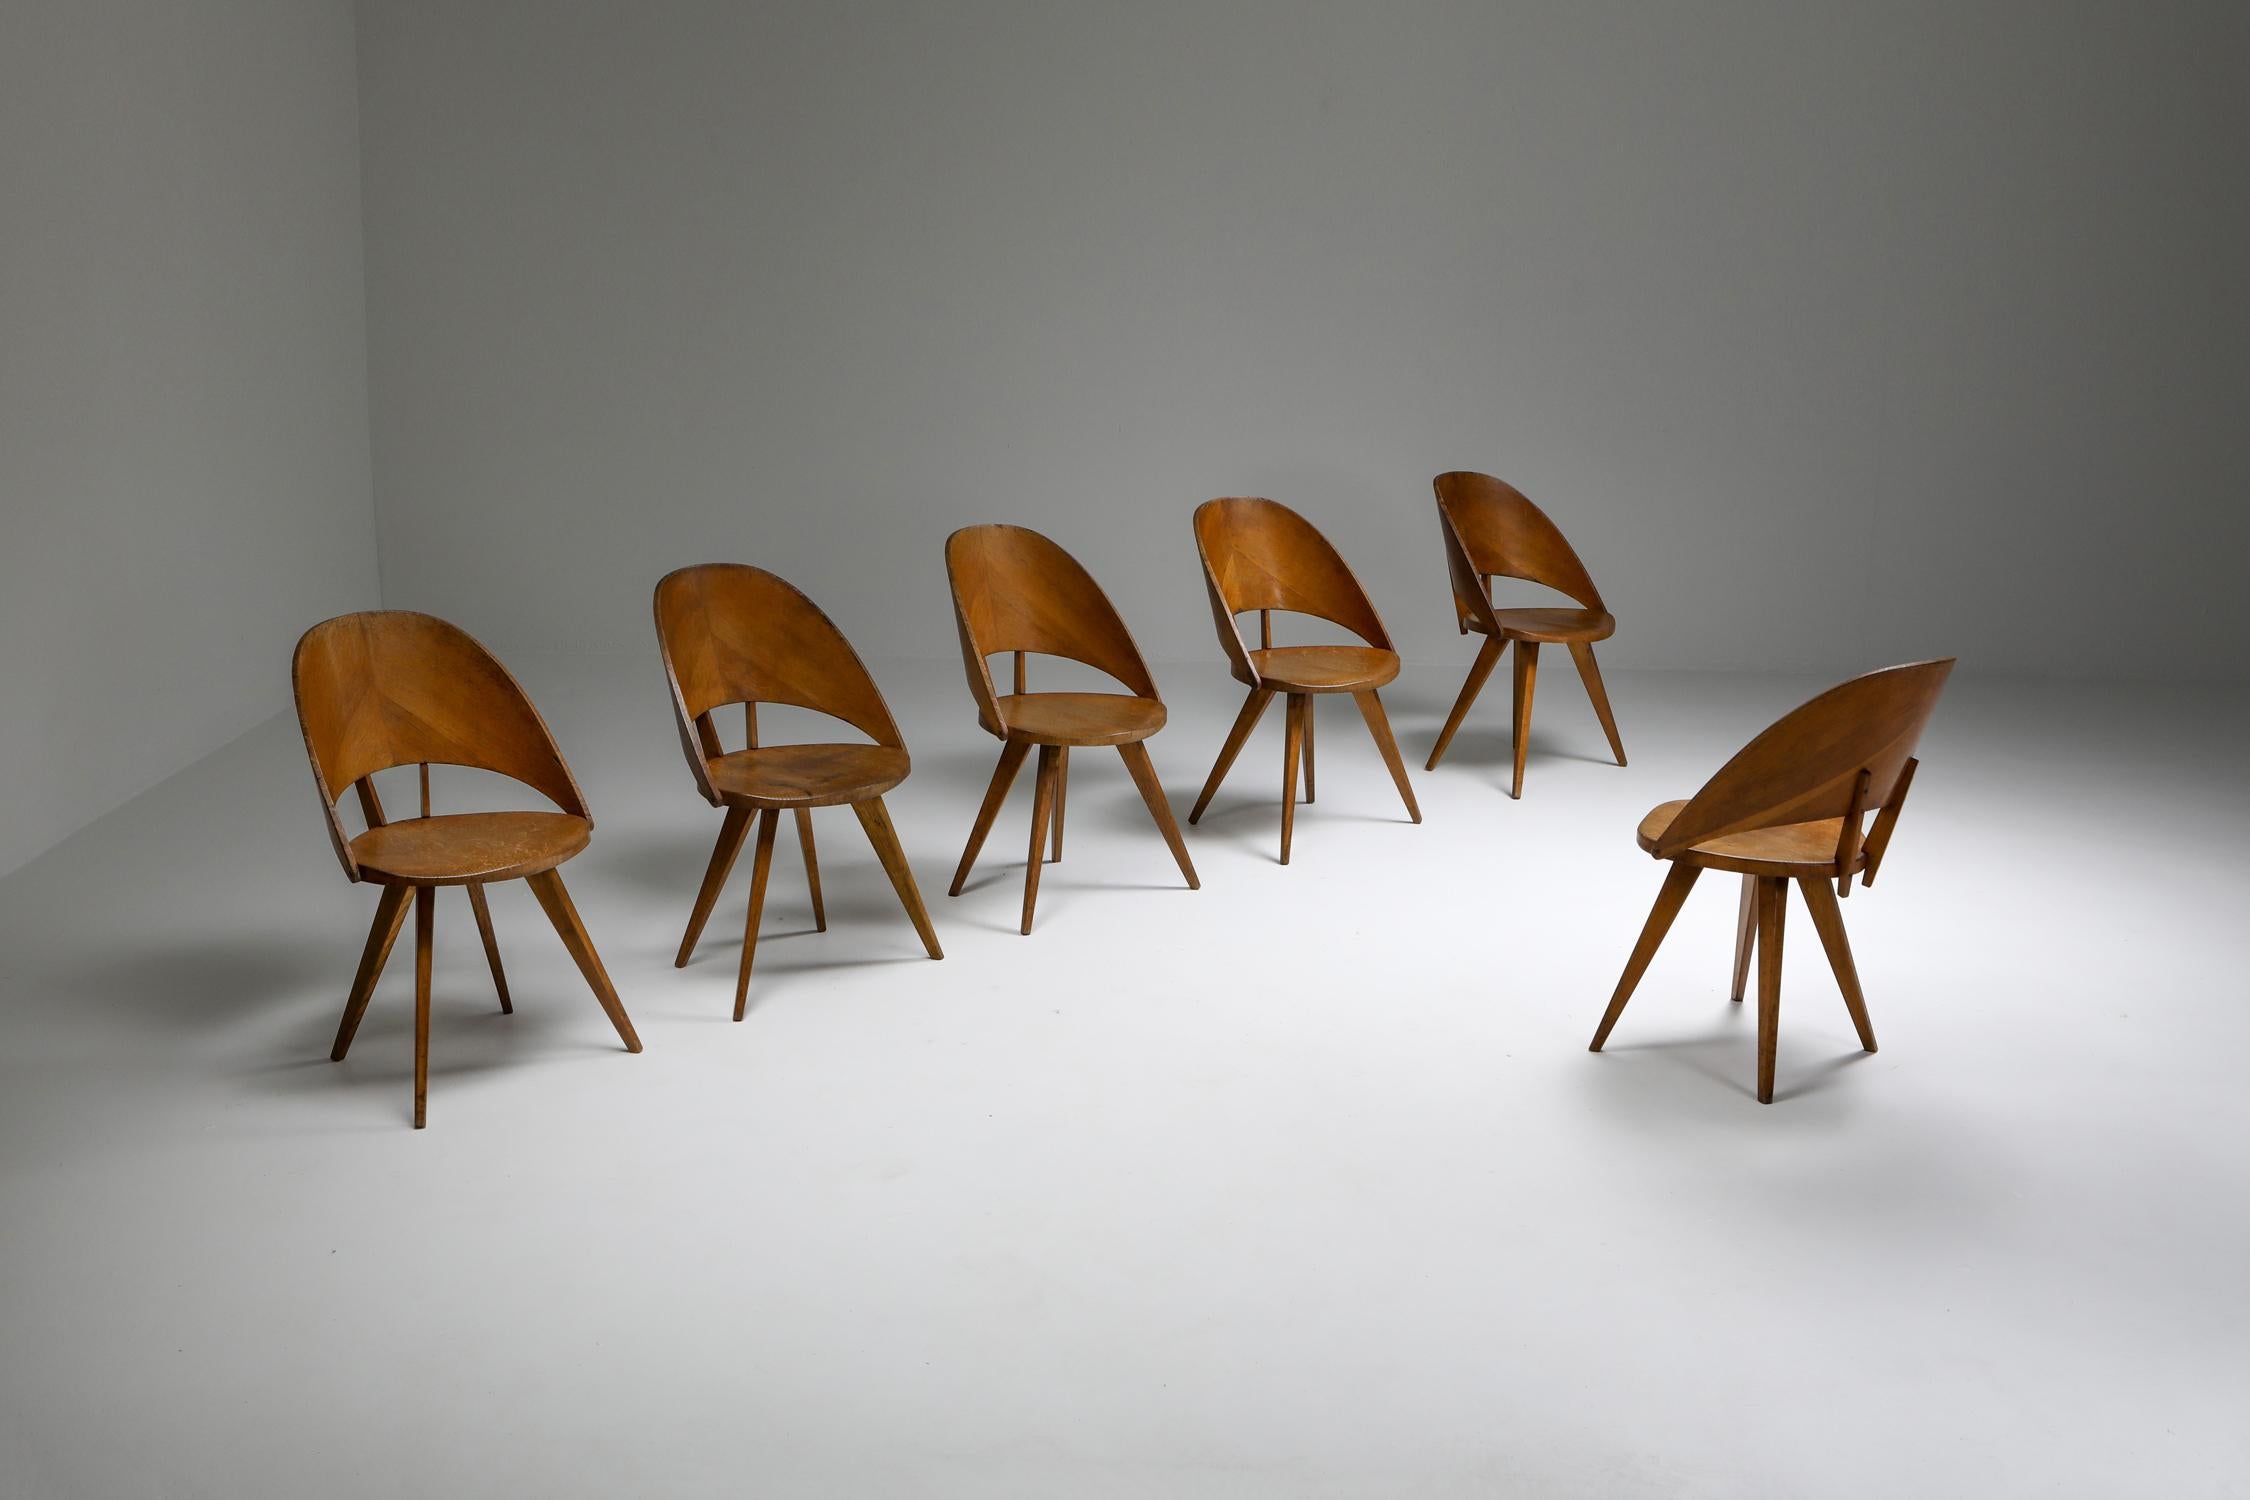 Early Mid-Century Modern dining chairs, solid oak and plywood, Italy, 1940s

Unknown and unusual dining chairs from the 1940s,
Like an early 'Medea' chair by Vincenzo Nobilis for Fratelli Tagliabue

The legs and seats are solid oak, which has